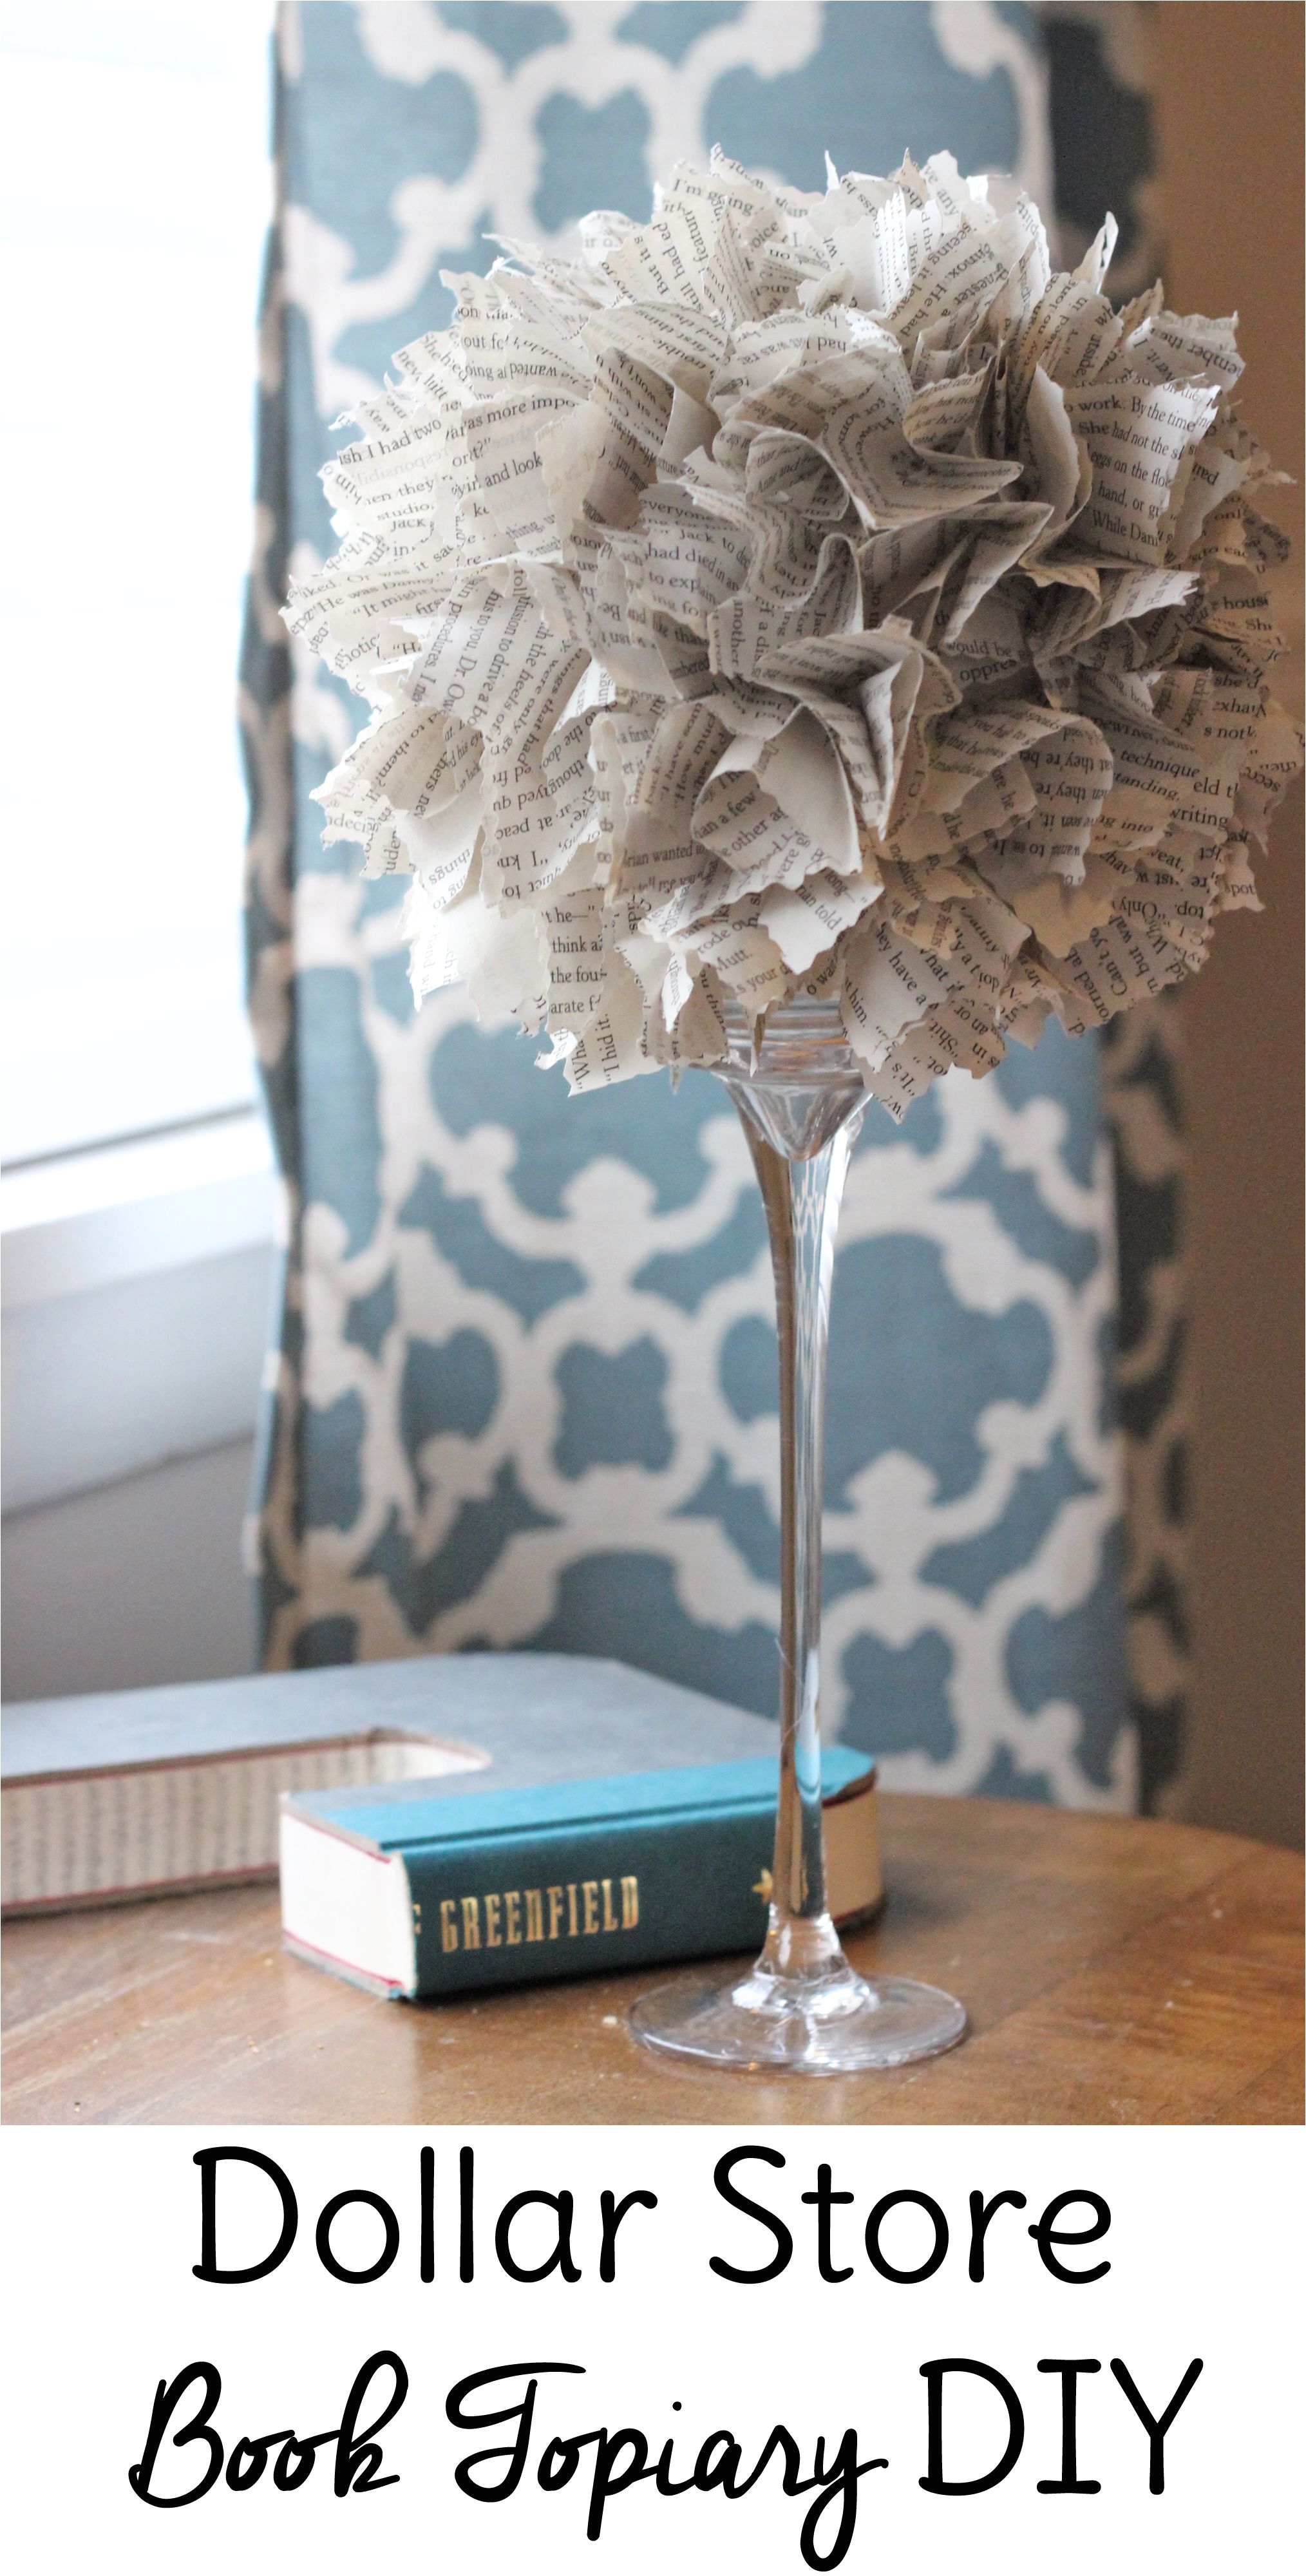 upcycle an old book into dollar store home decor diy